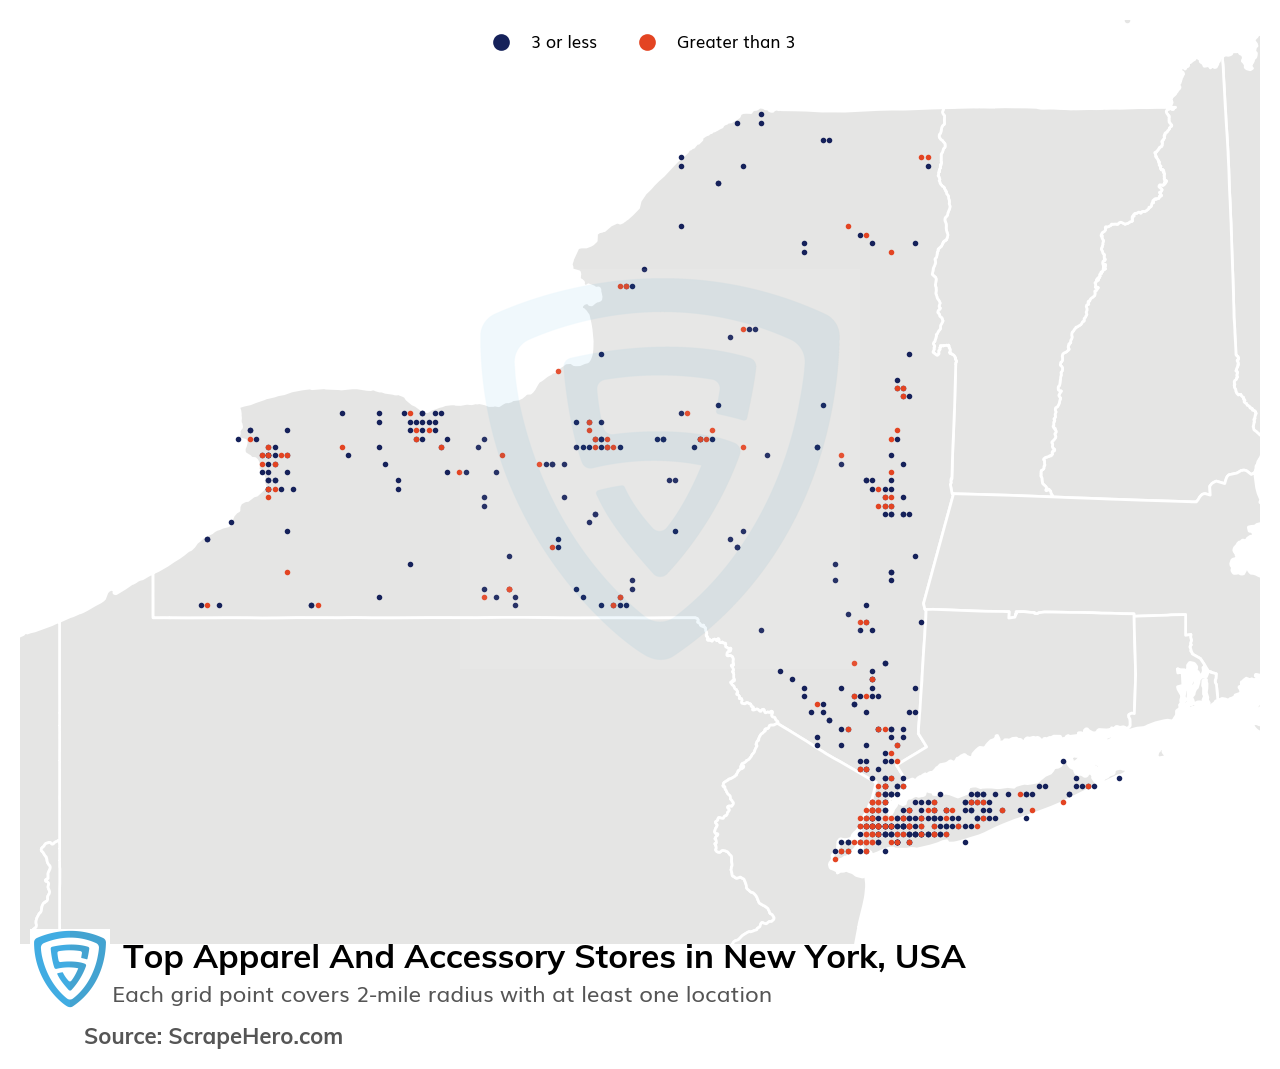 Map of 10 Largest apparel & accessory stores in New York in 2022 Based on Locations